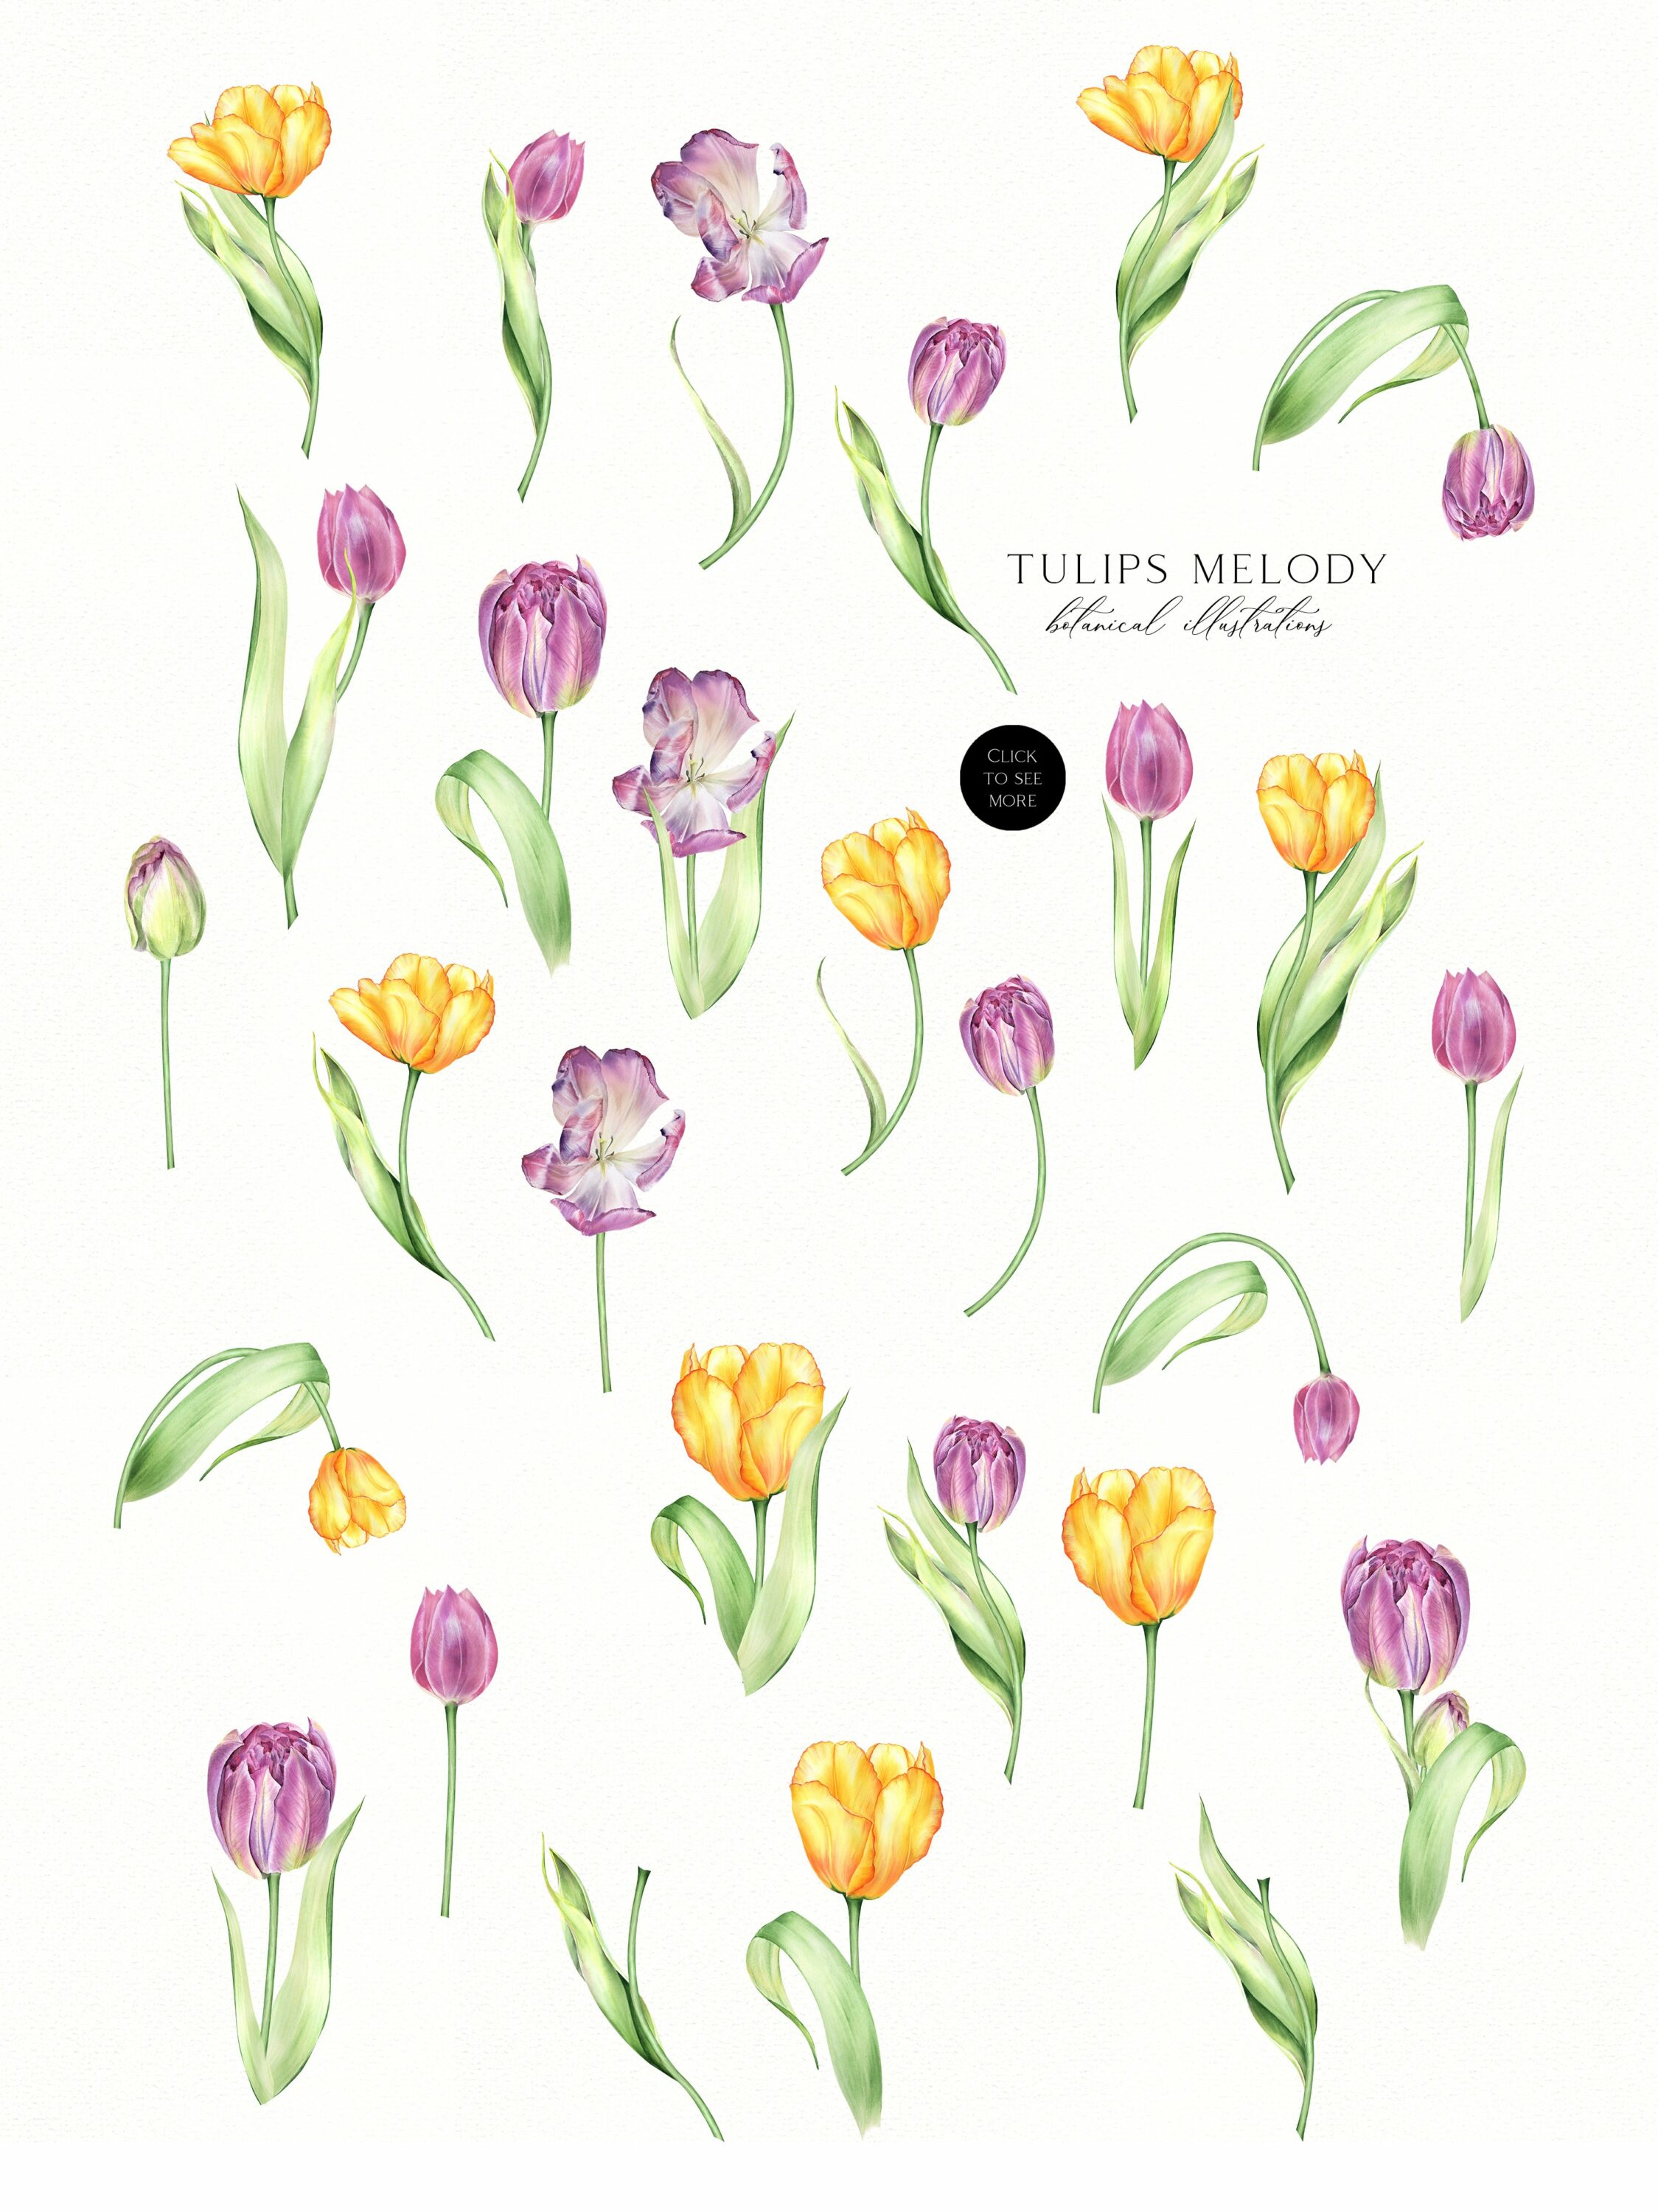 Watercolor Tulips Melody.